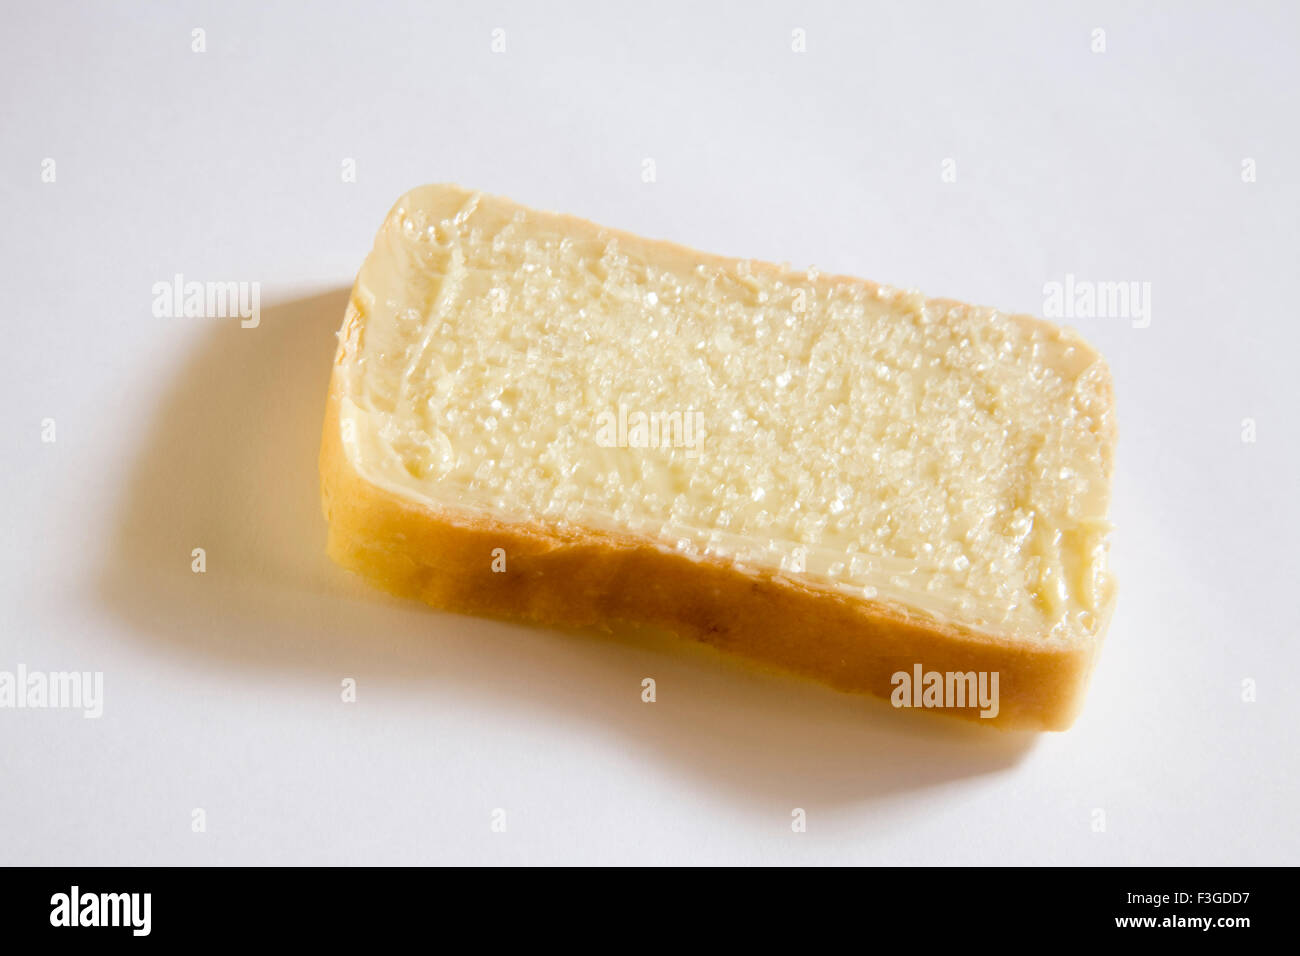 Breakfast food ; butter and sugar applied on single slice of bread Stock Photo